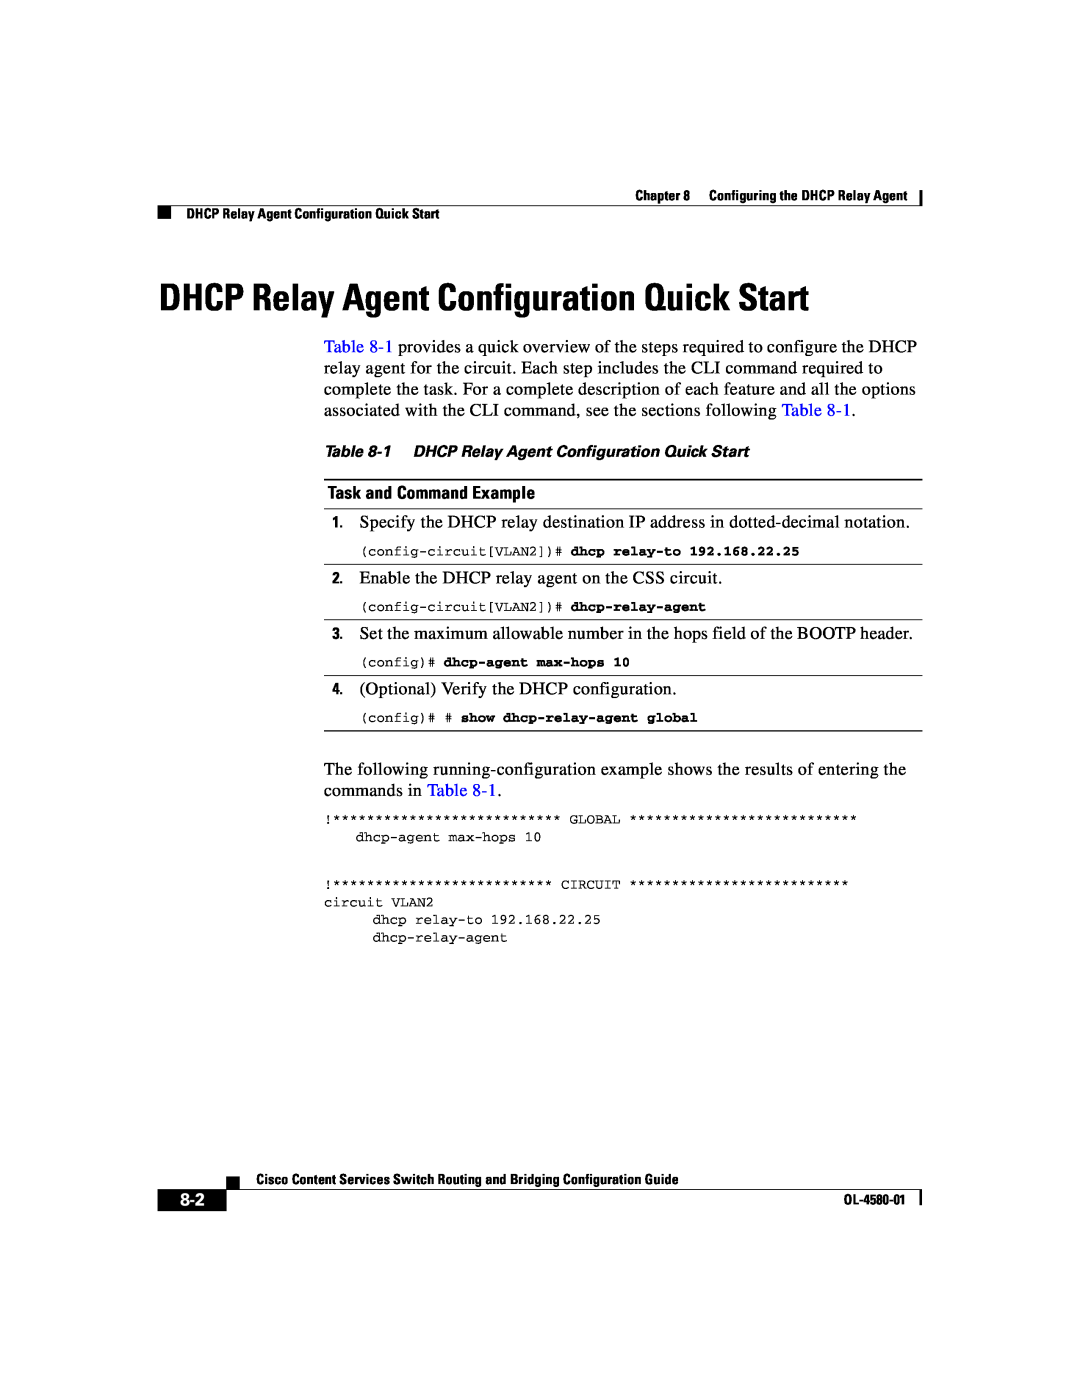 Cisco Systems OL-4580-01 manual DHCP Relay Agent Configuration Quick Start, Task and Command Example 